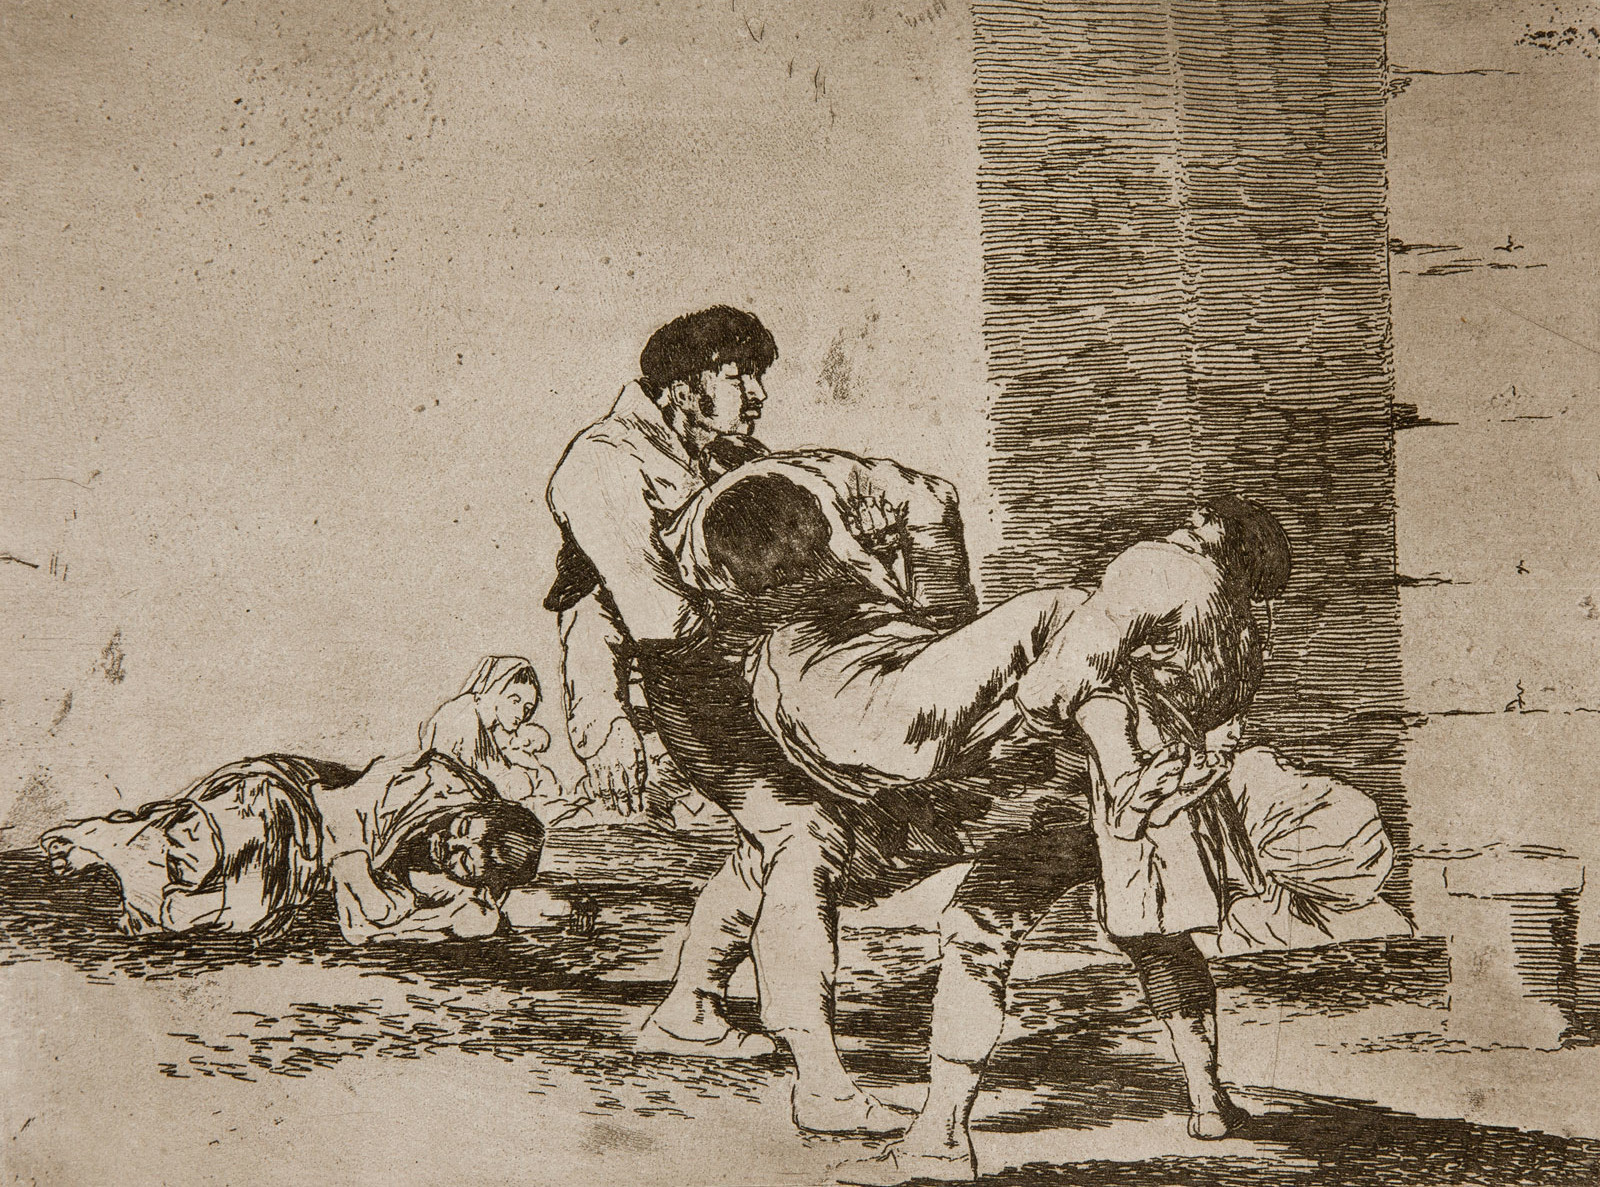 Francisco Goya: To the Cemetery, 1810-1820